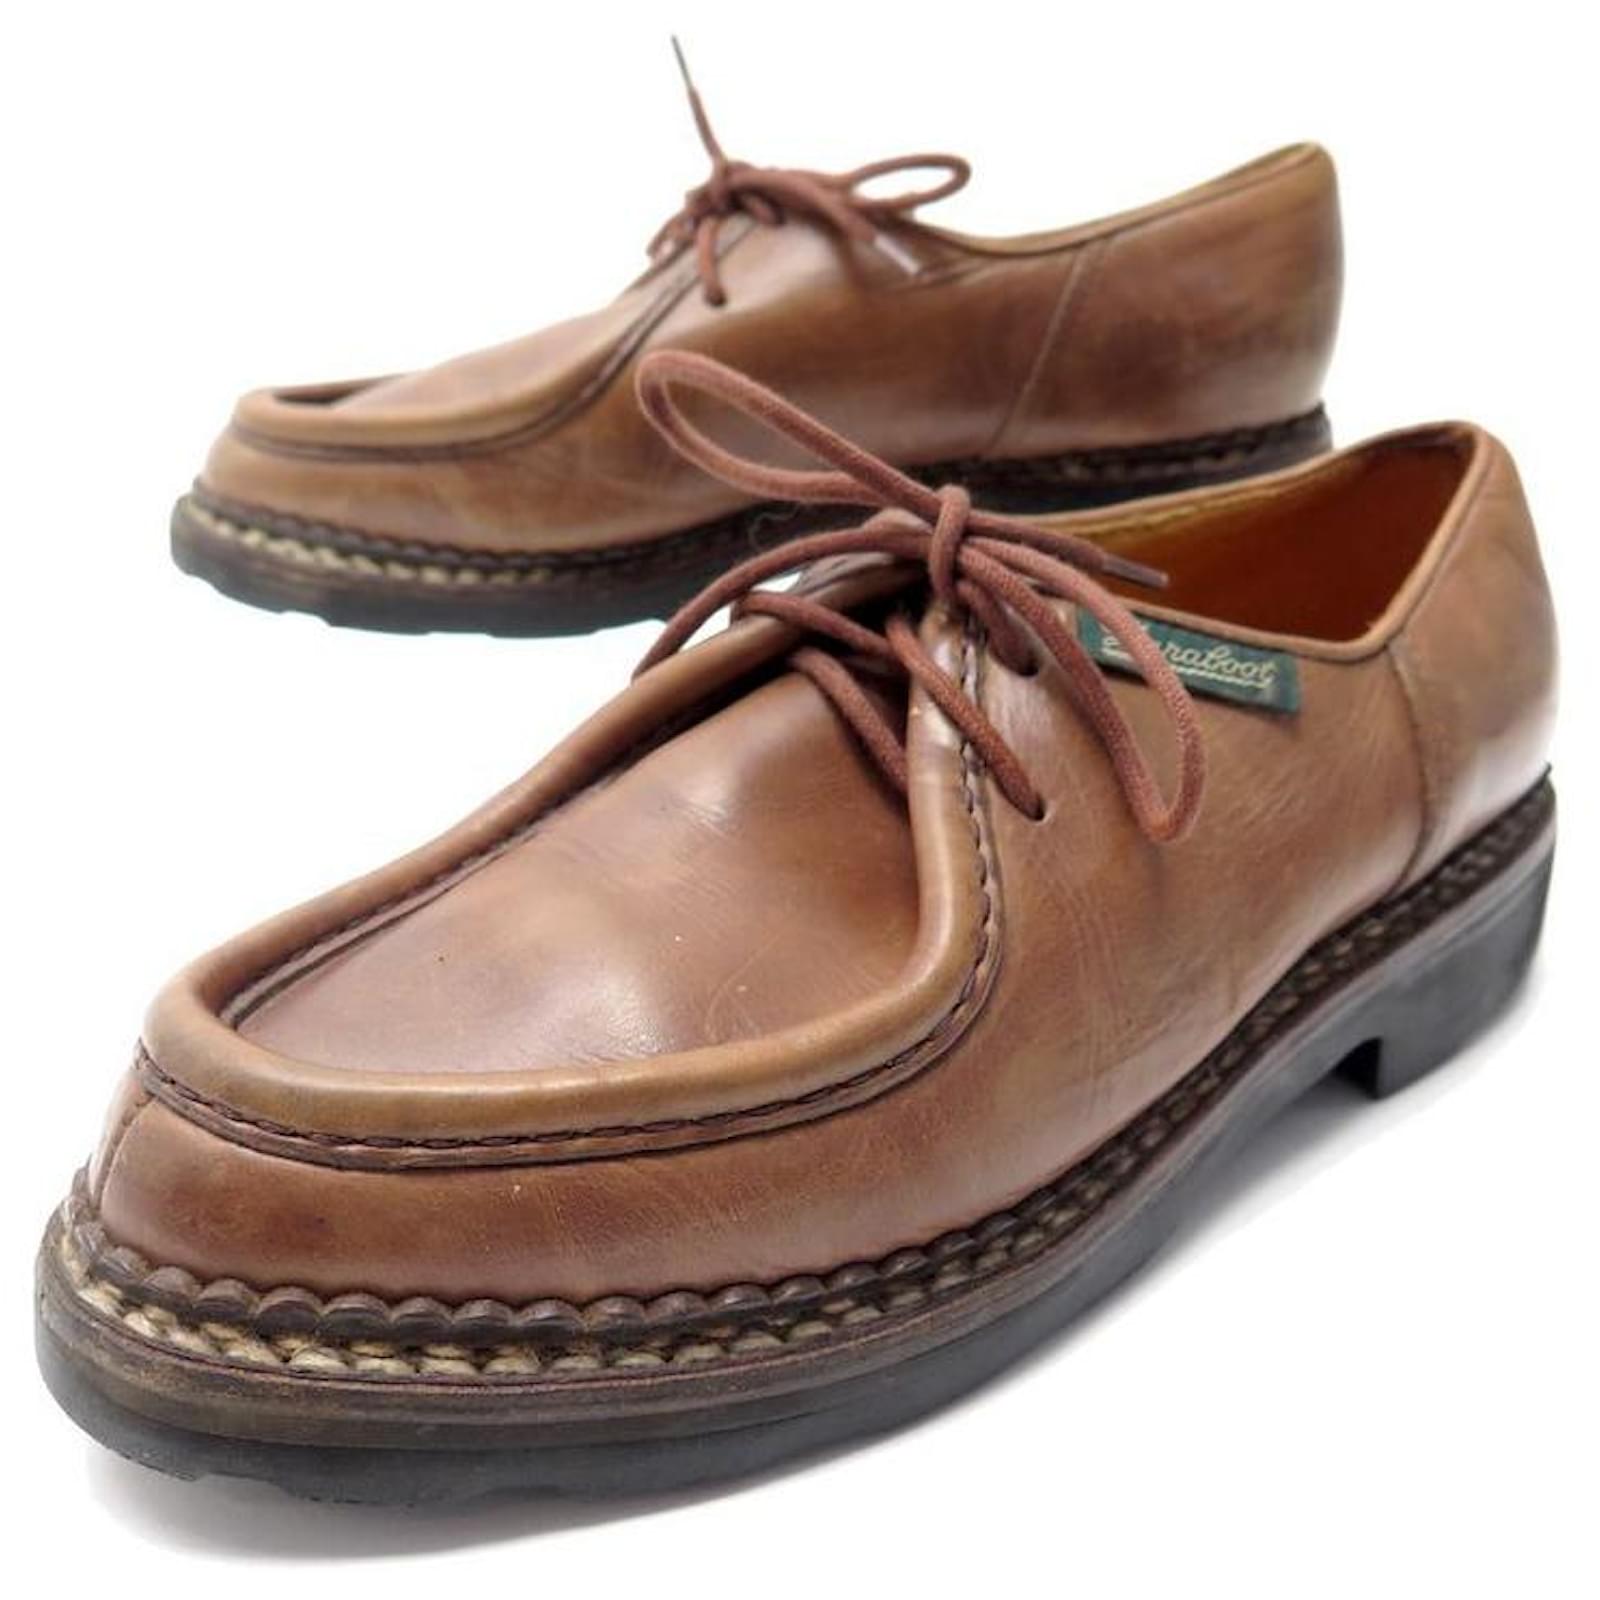 PARABOOT MICHAEL MARCHE II DERBY SHOES 6 40 BROWN LEATHER SHOES